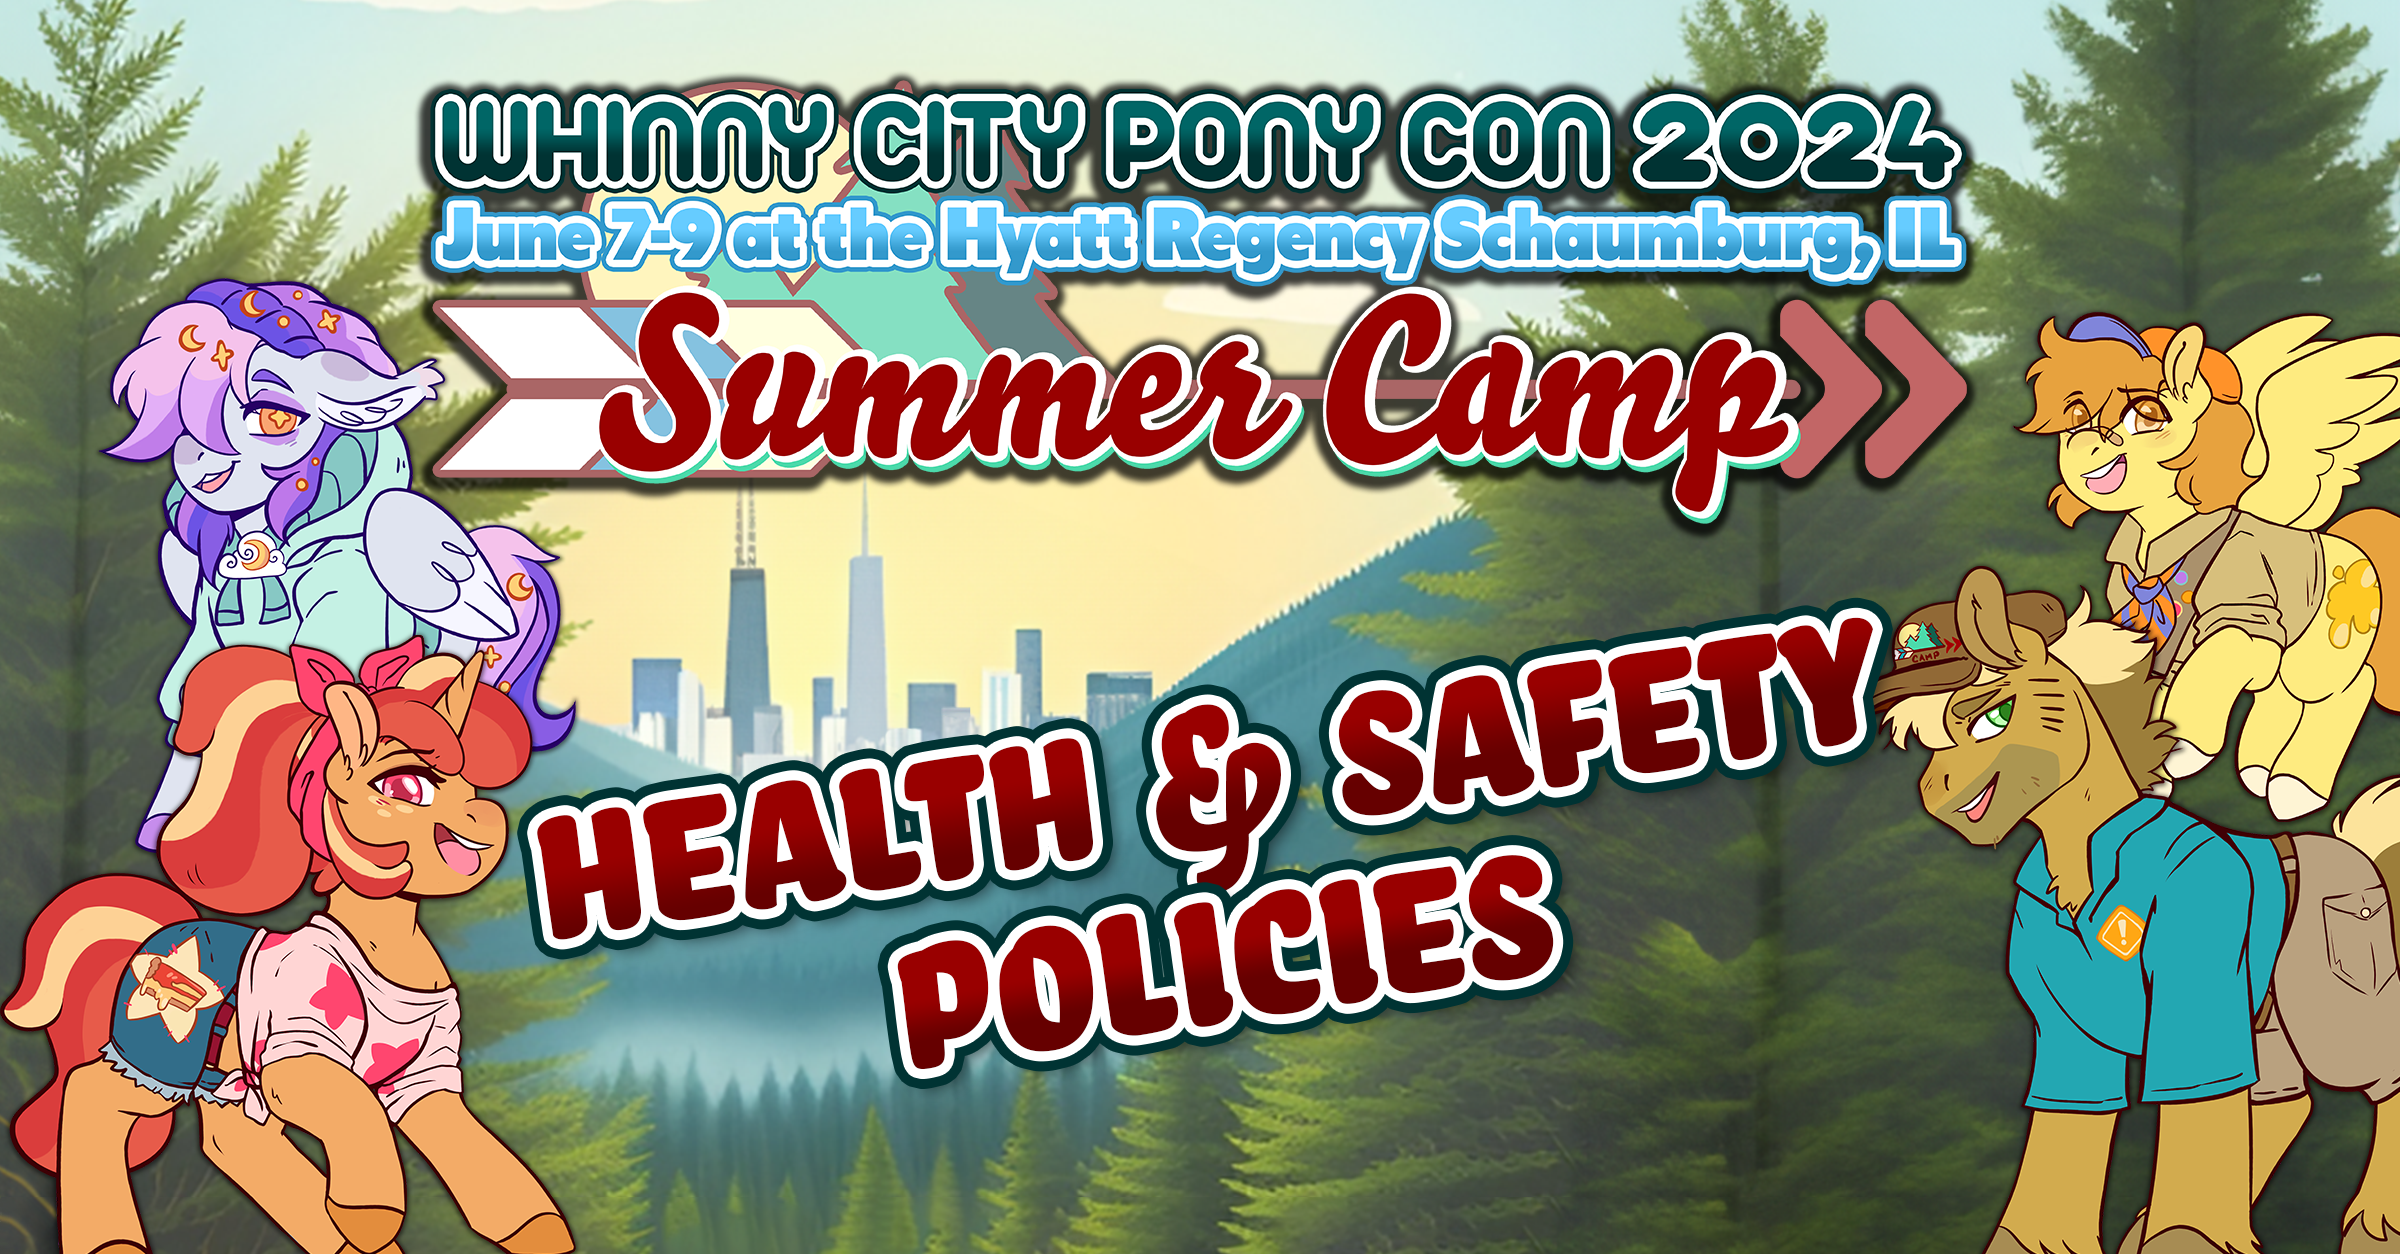 WCPC22 Health and Safety Policies